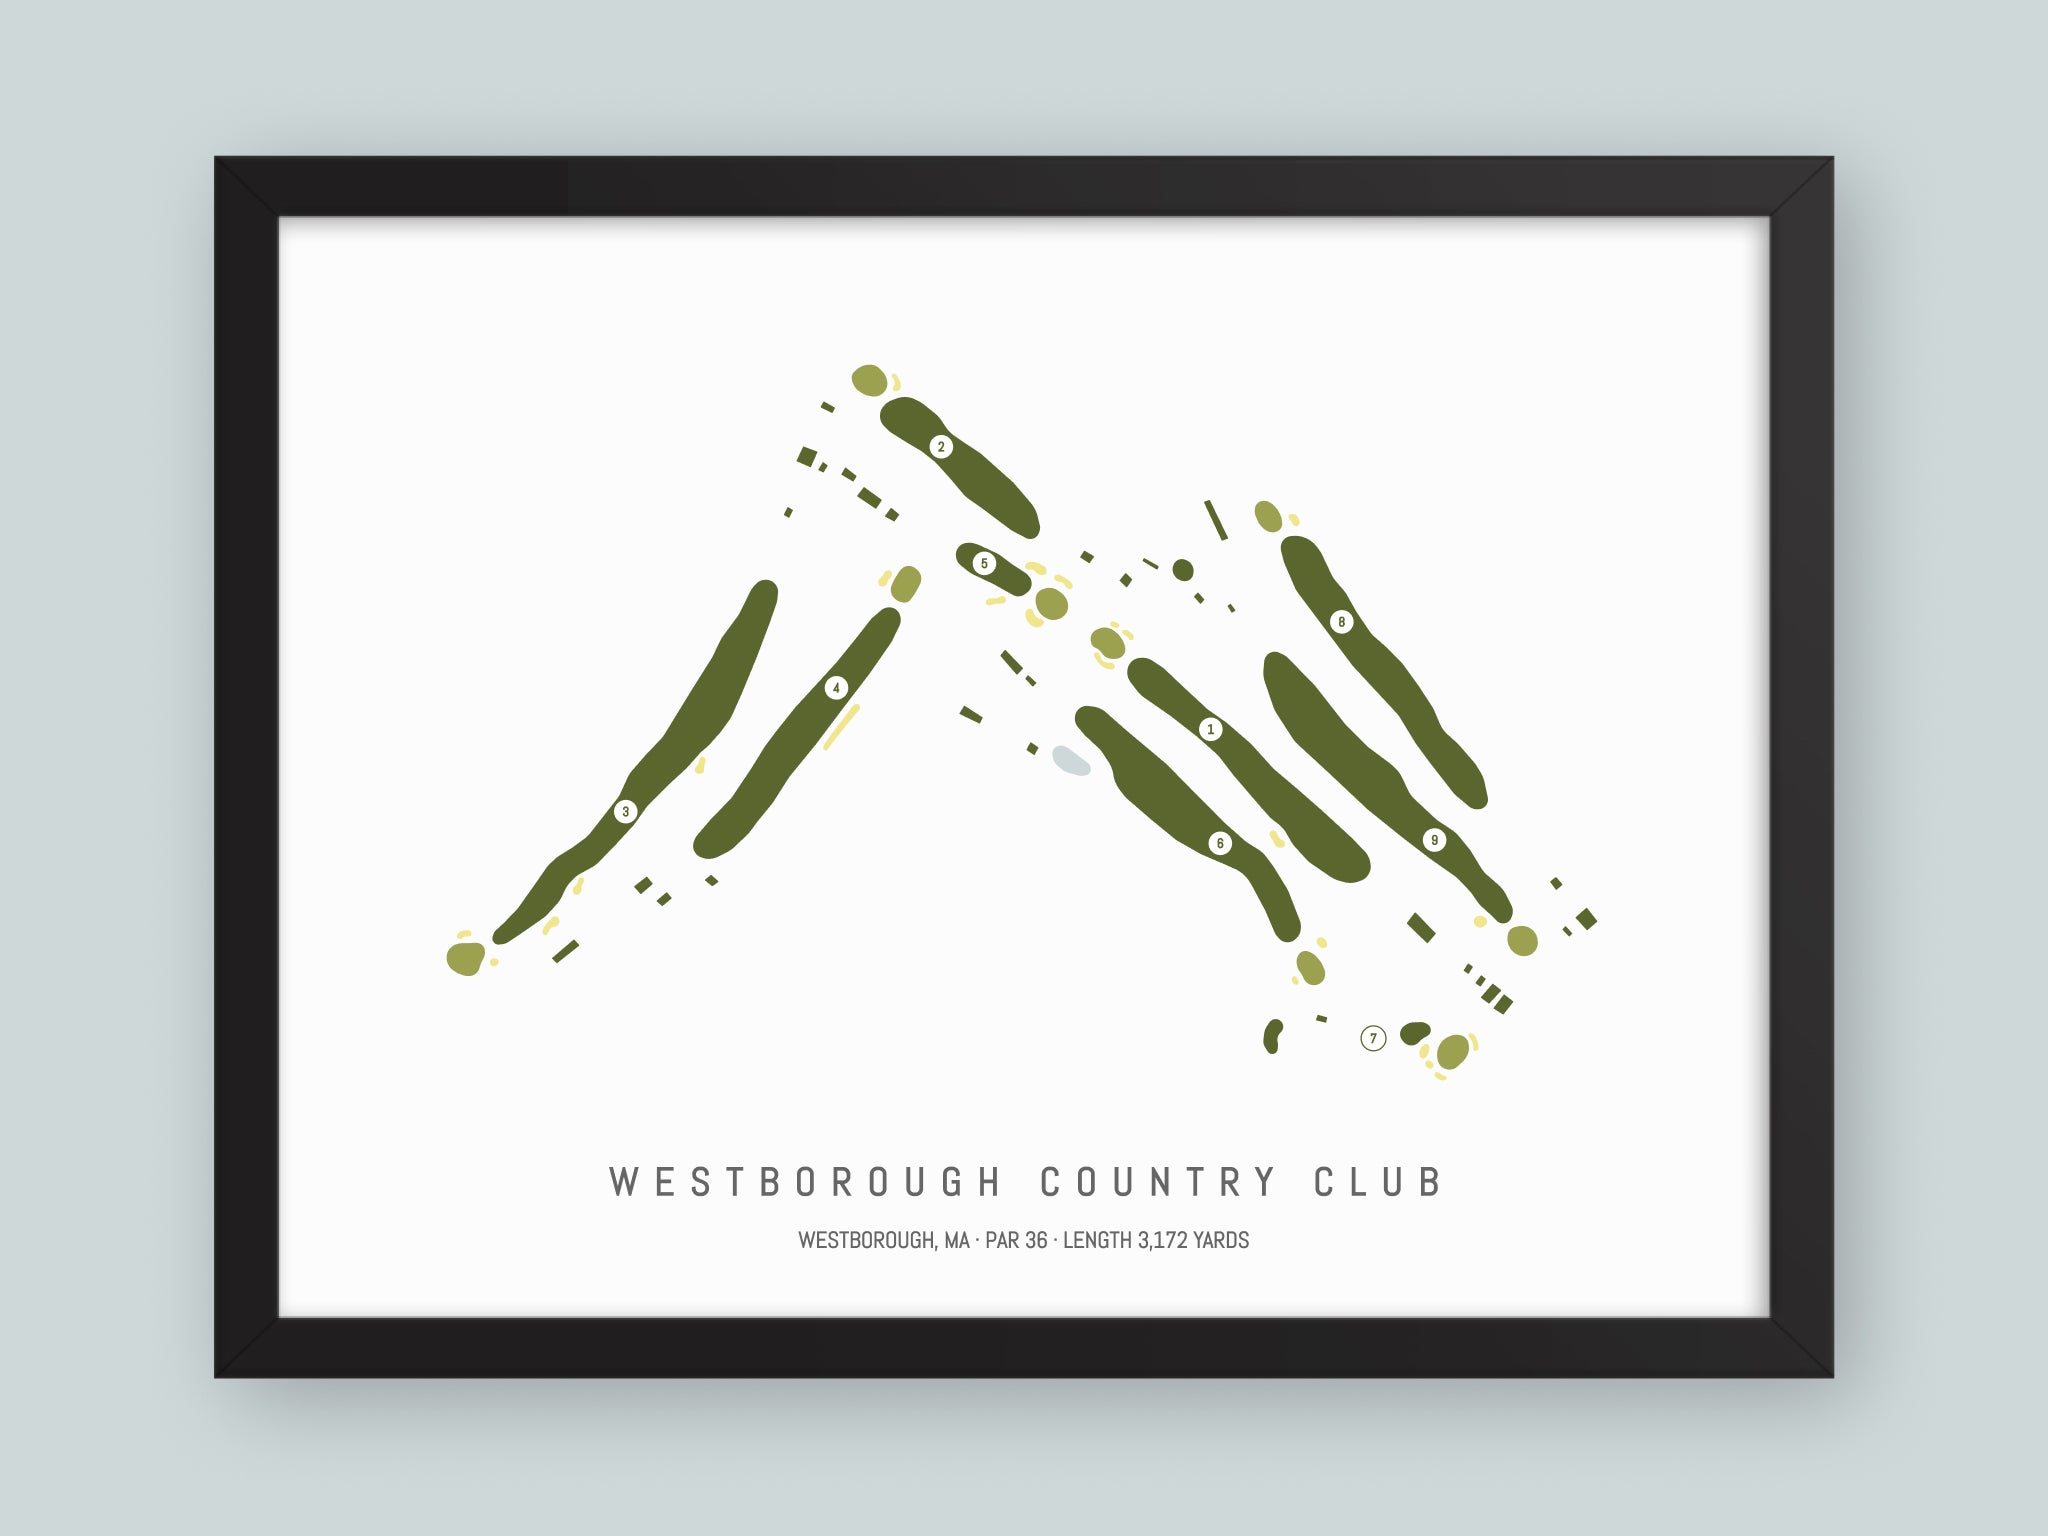 Westborough-Country-Club-MA--Black-Frame-24x18-With-Hole-Numbers